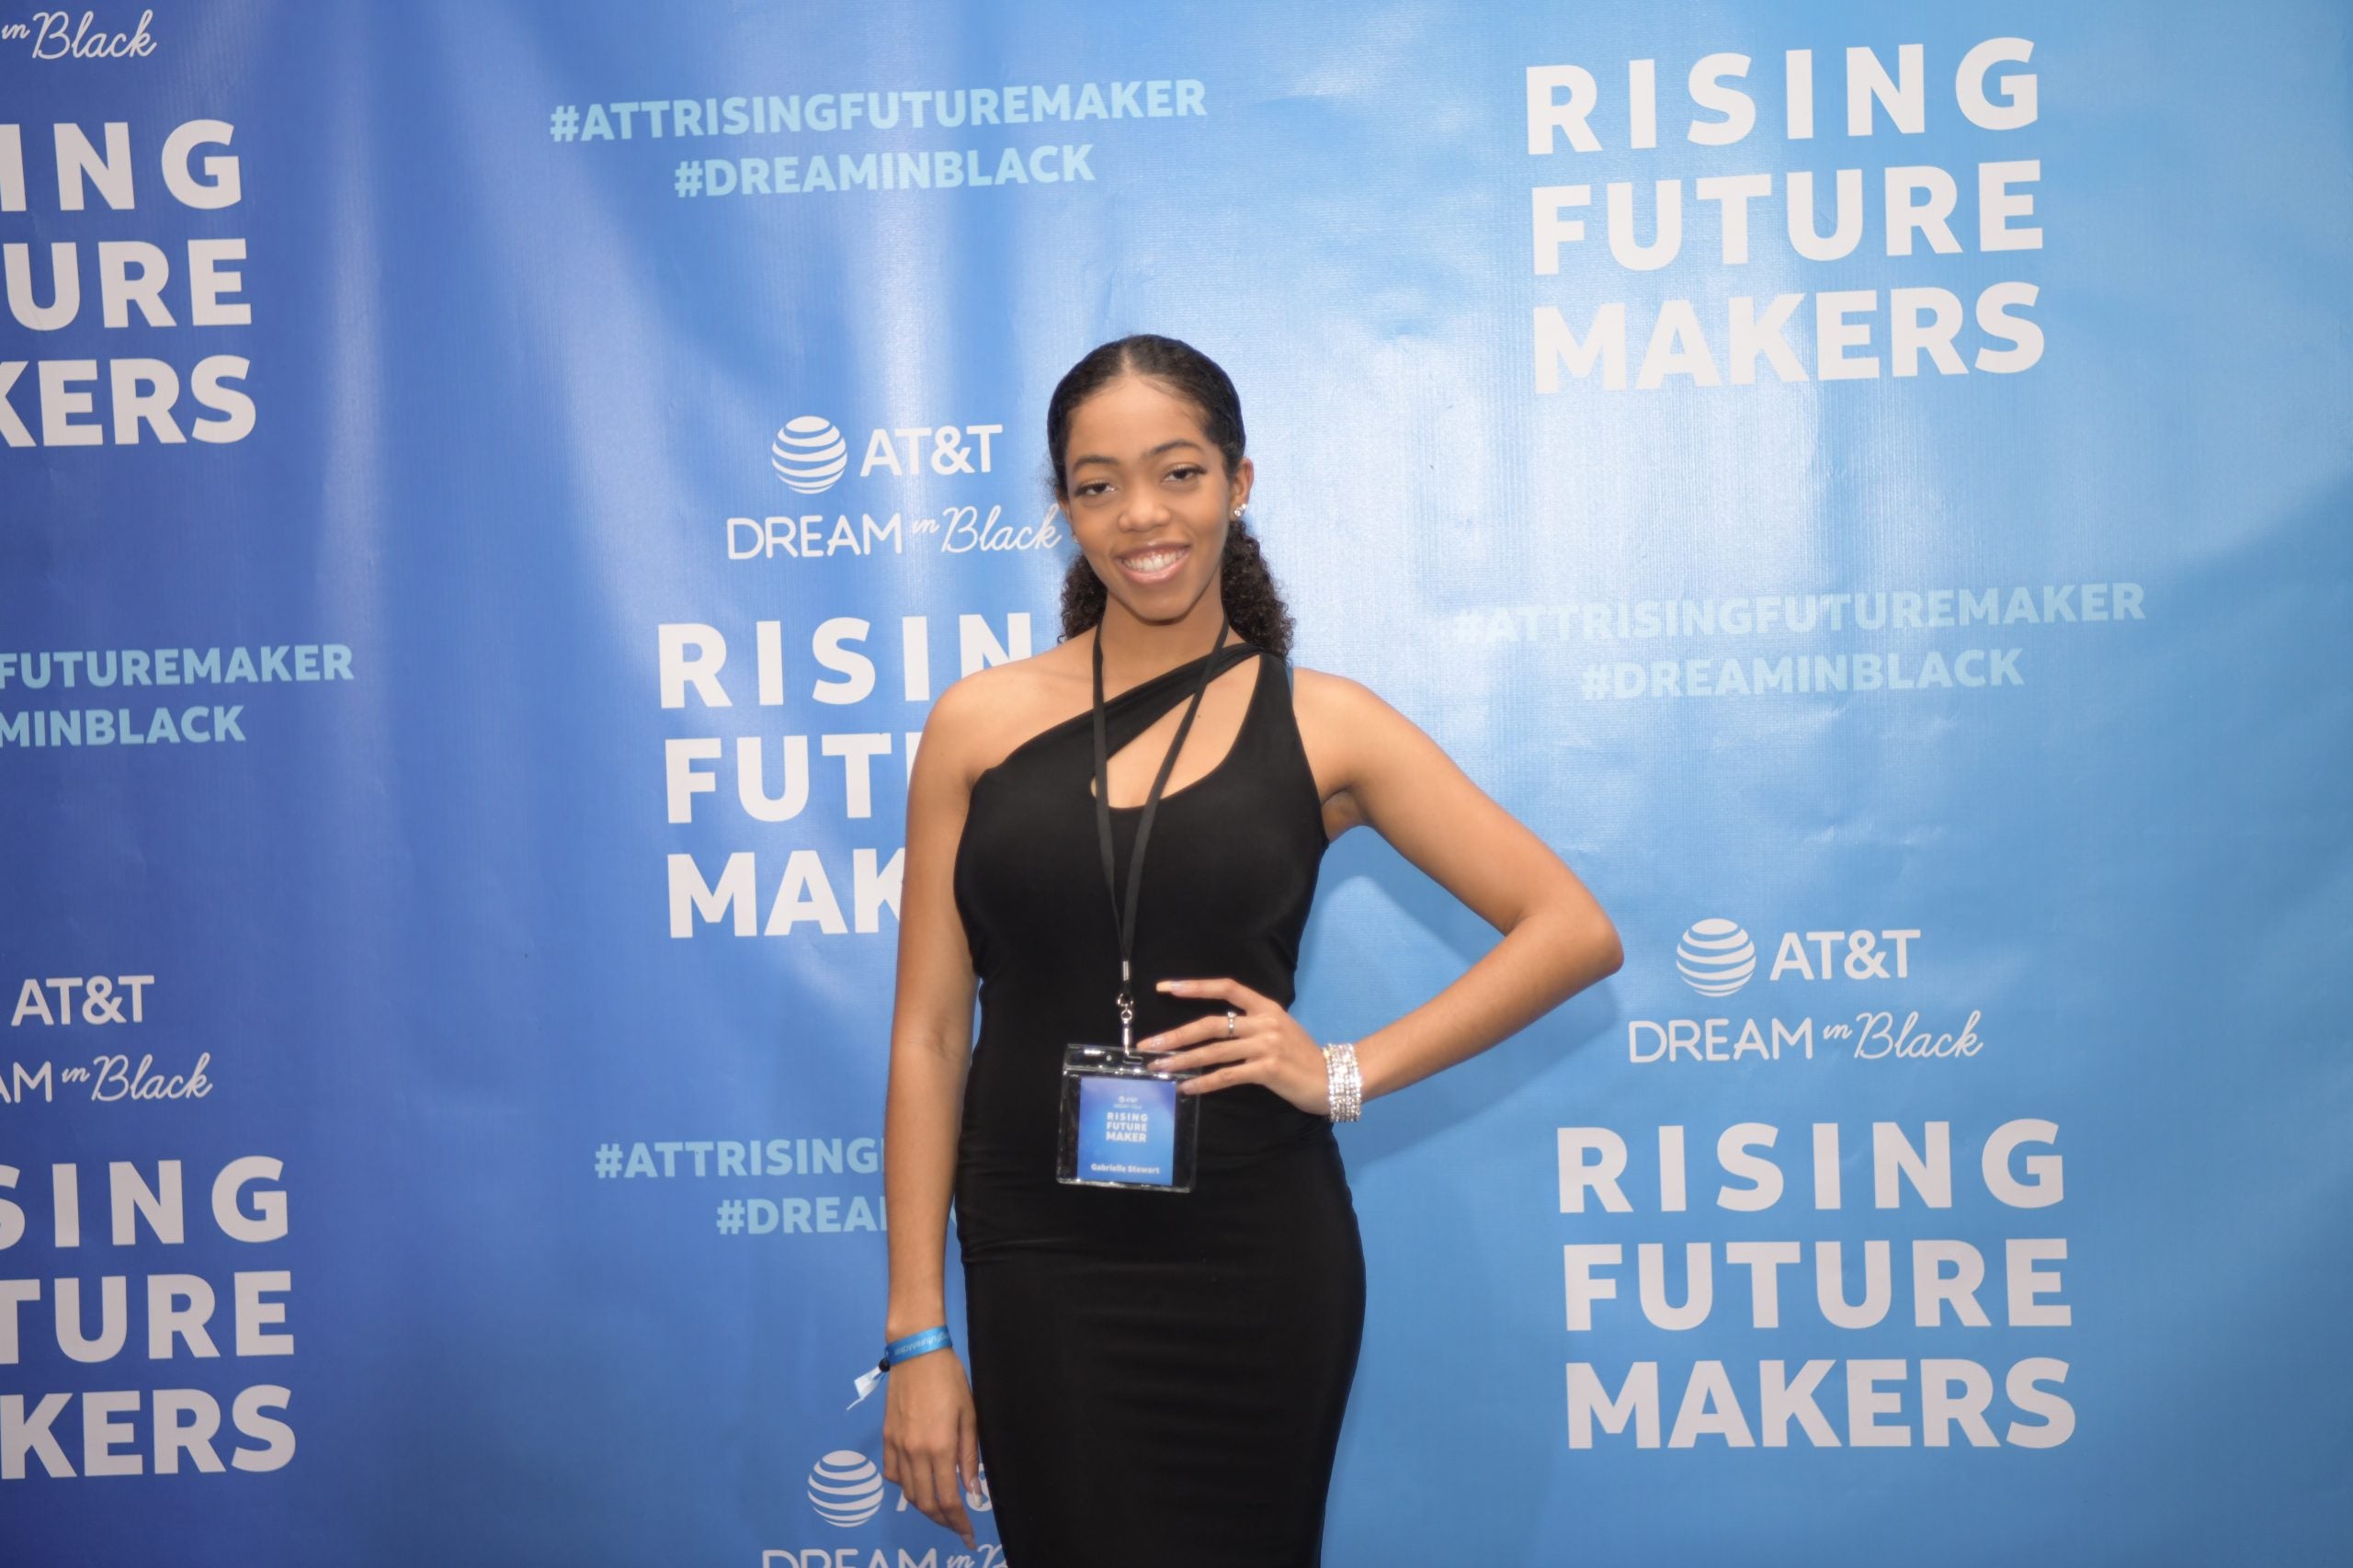 AT&T Created A Seat at the Table for the Young, Black, and Gifted